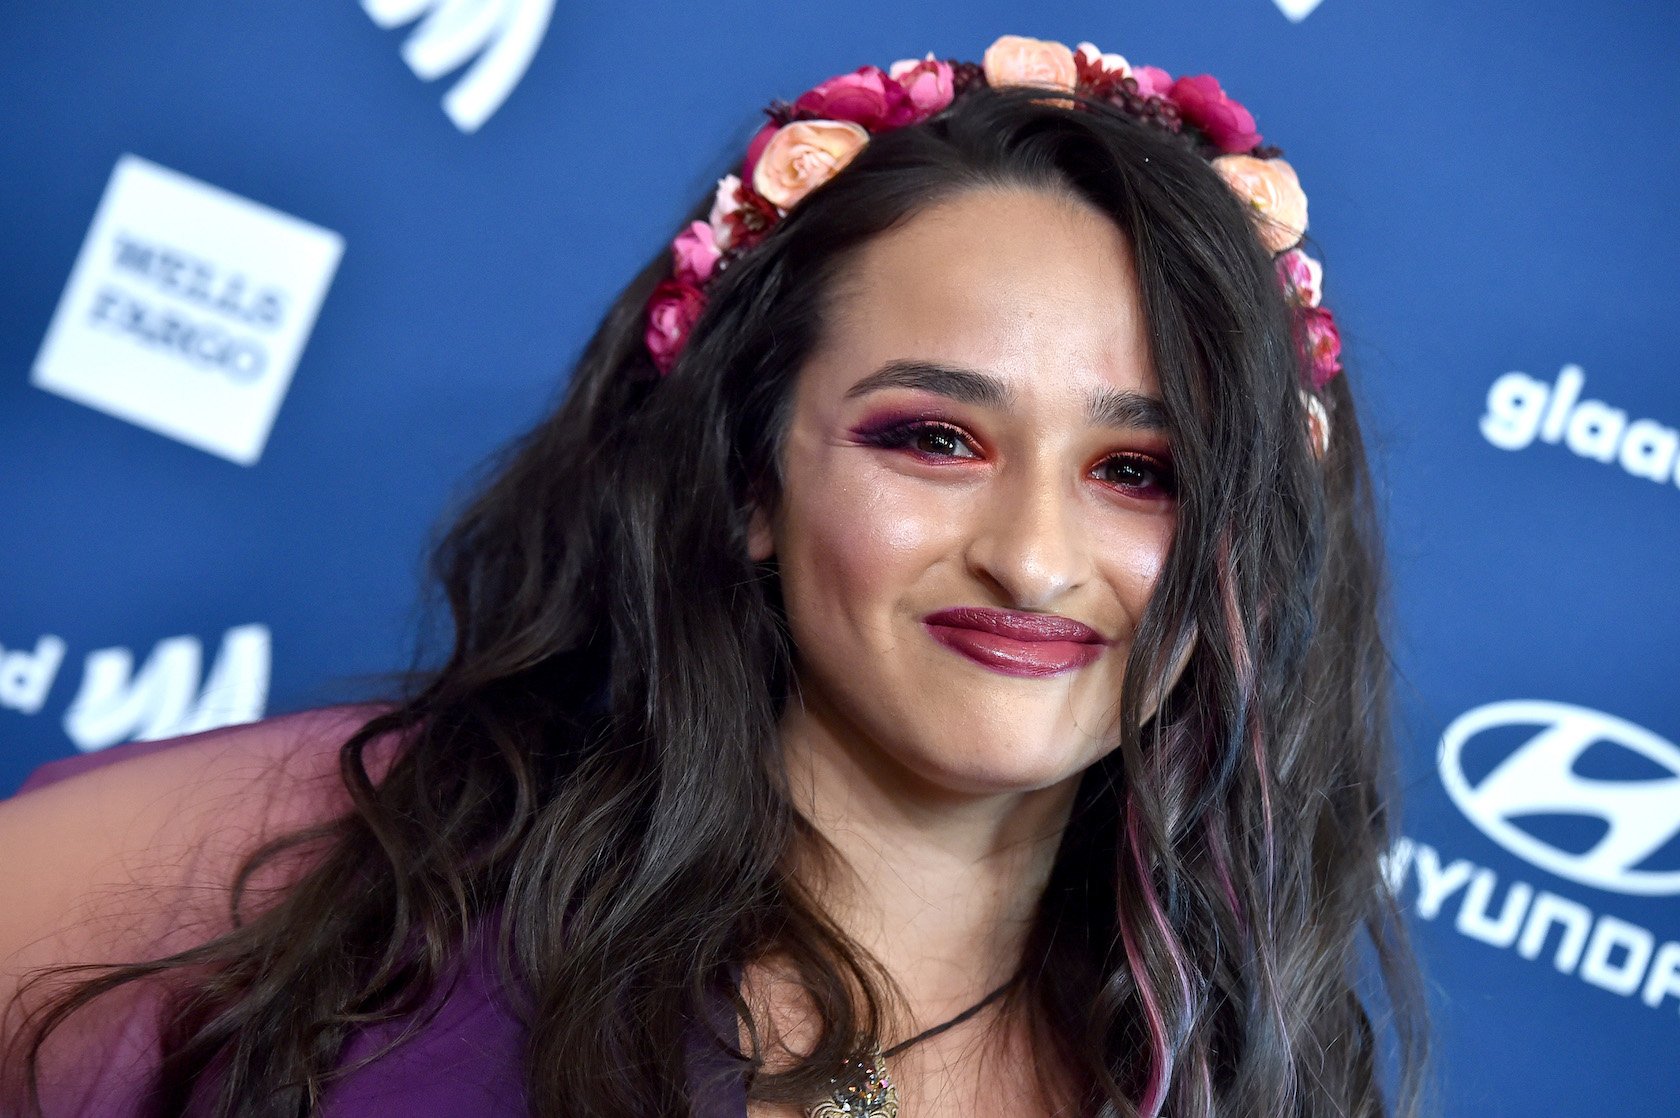 A close-up of Jazz Jennings from 'I Am Jazz' Season 7 smiling at an event